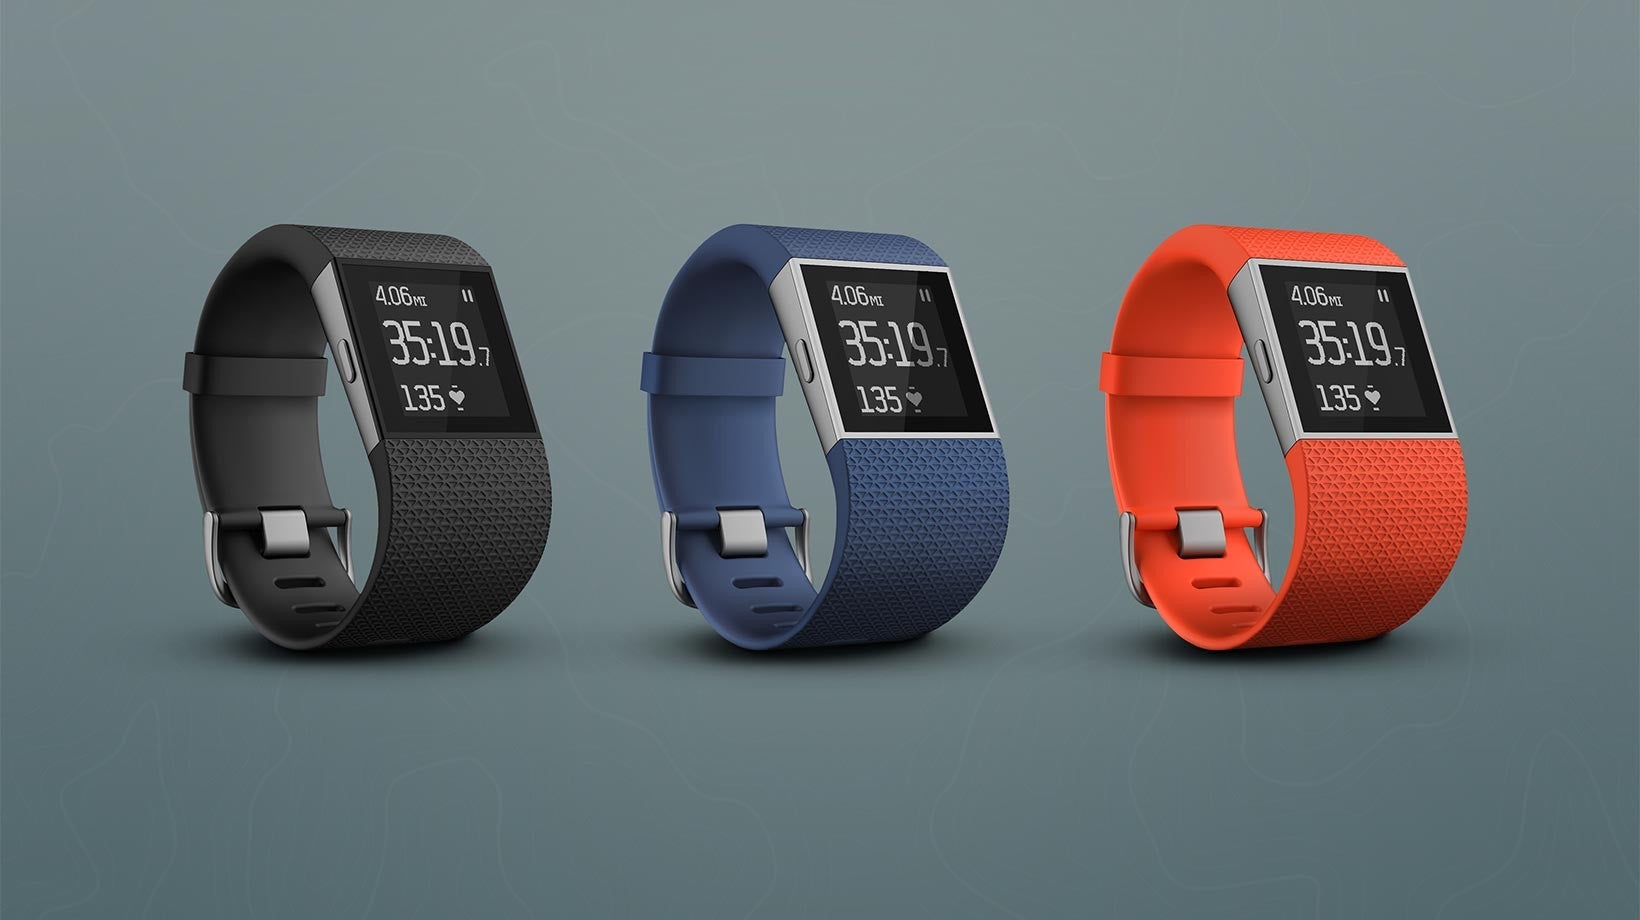 Fitbit Surge - CES 2015: all new wearables and accessories